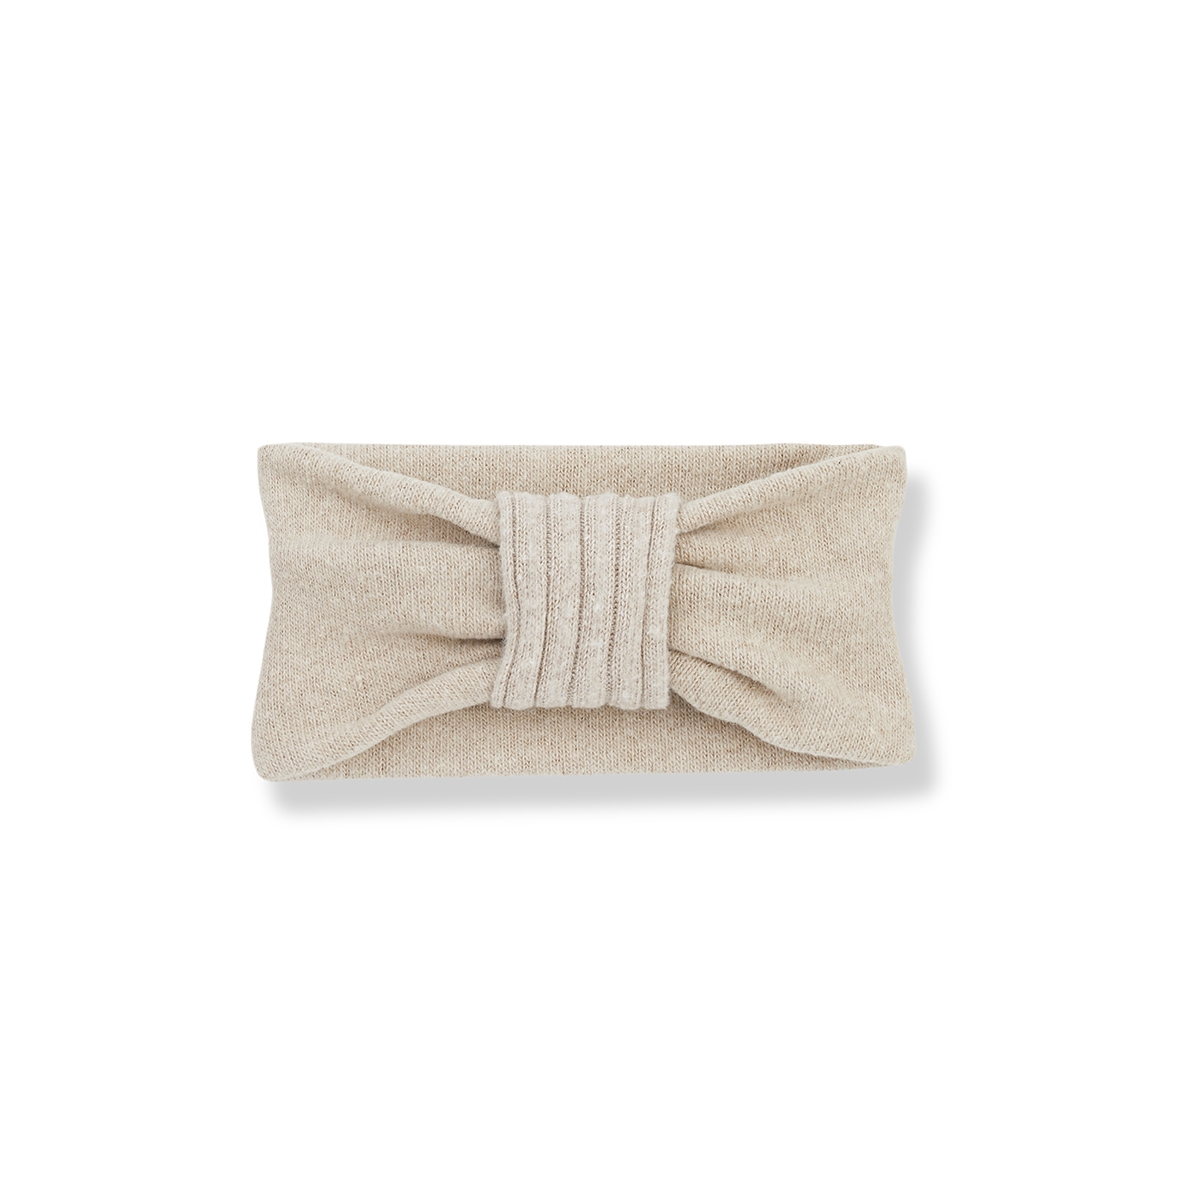 1 + in the family Abril hair band beige AW21-ABRIL-CREAM 